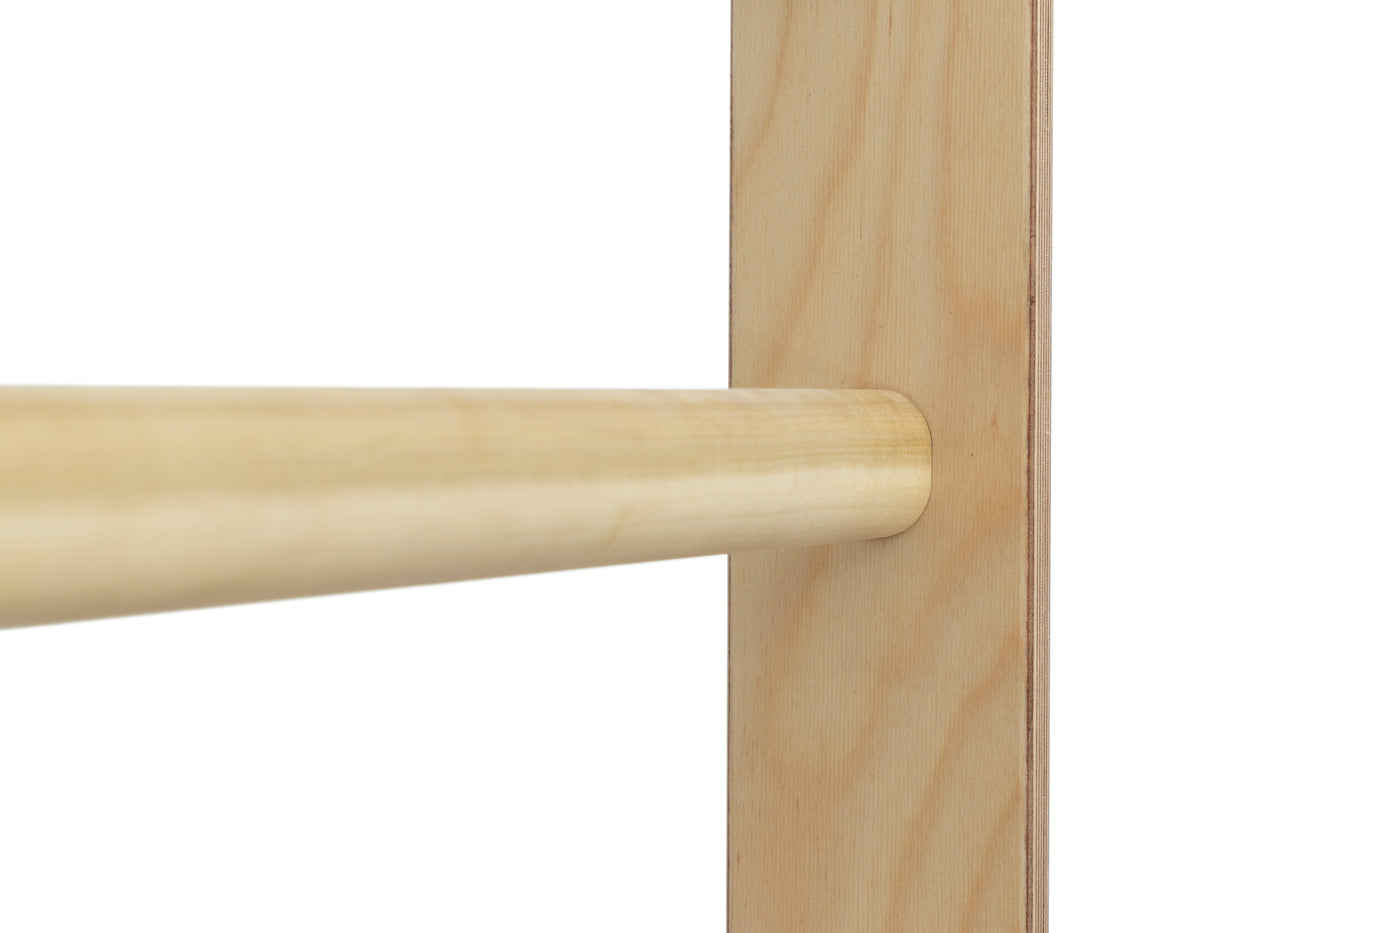 Schroth Method Swedish Wall Bar for Scoliosis Therapy: Oval hardwood dowel close up.